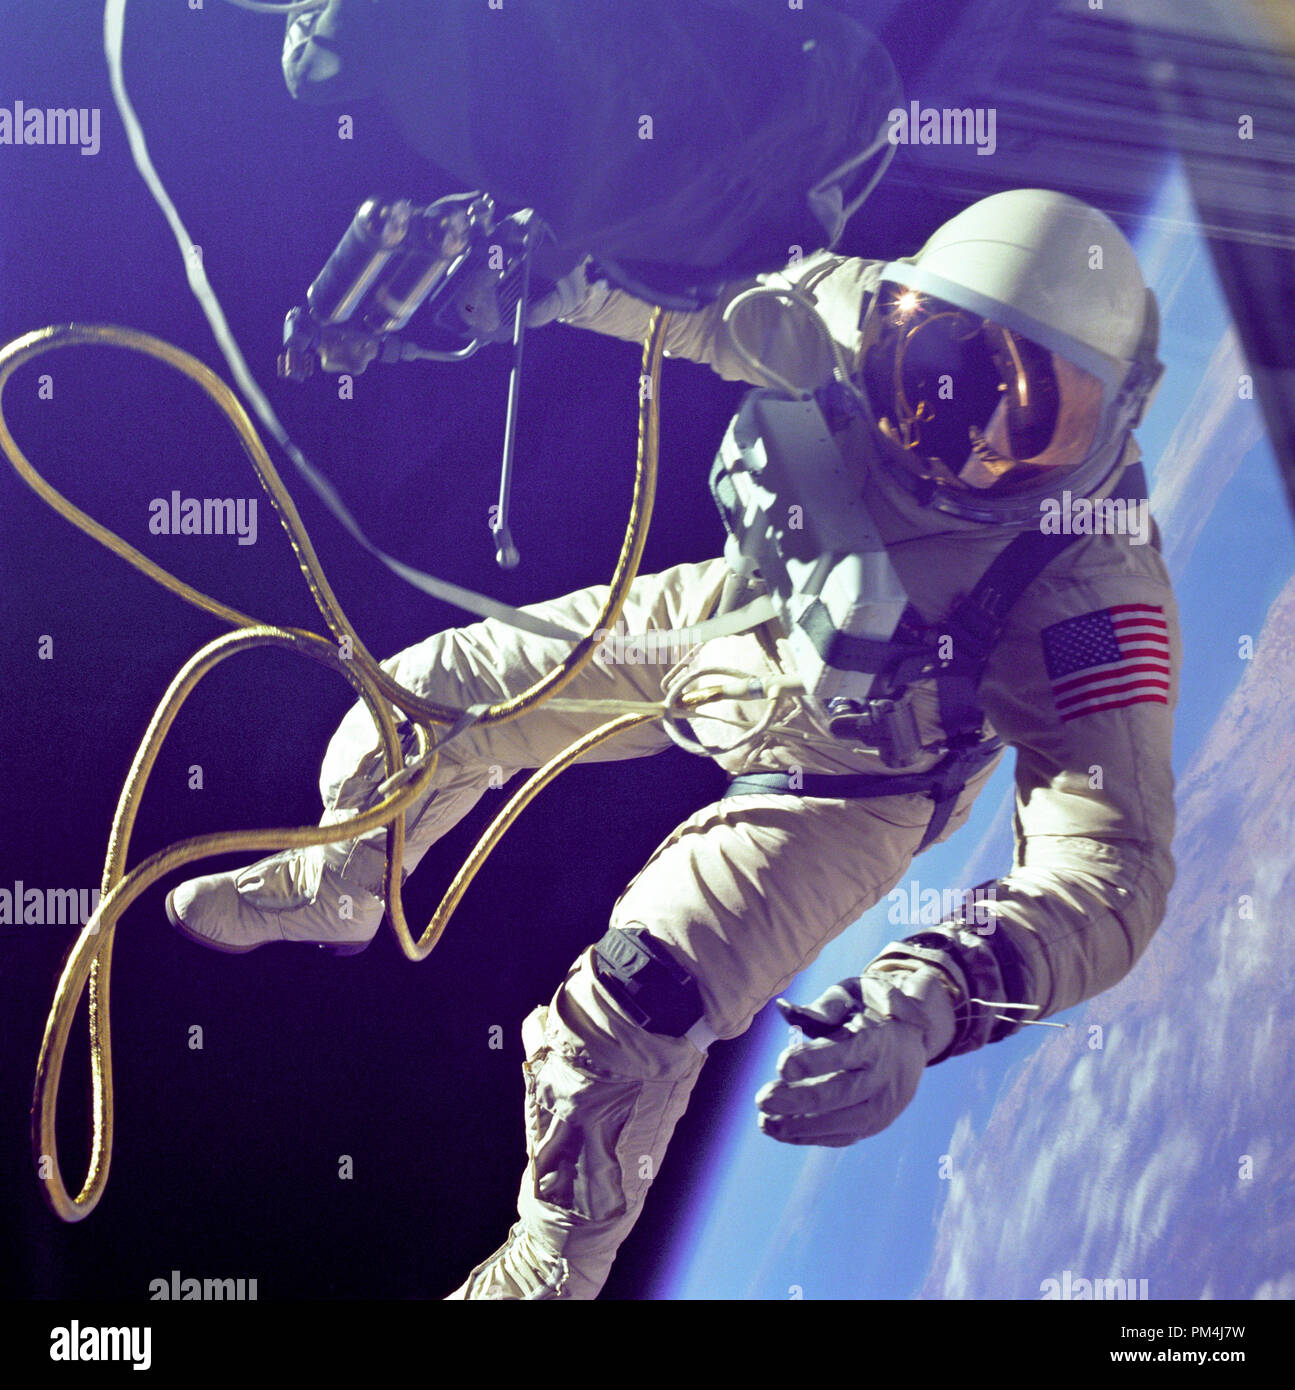 Astronaut Edward H. White, pilot for the Gemini IV spaceflight, floats in space during the first spacewalk by an American. The extravehicular activity, or spacewalk, was performed during the third Earth orbit of the Gemini IV mission. White is attached to the spacecraft by a 25-foot umbilical line and a 23-foot tether line, both wrapped in gold tape to form one cord. In his right hand White carries a Hand-Held Self-Maneuvering Unit. The visor of his helmet is gold-plated to protect him from the unfiltered rays of the sun. (June 3, 1965)   File Reference # 1003 590THA Stock Photo